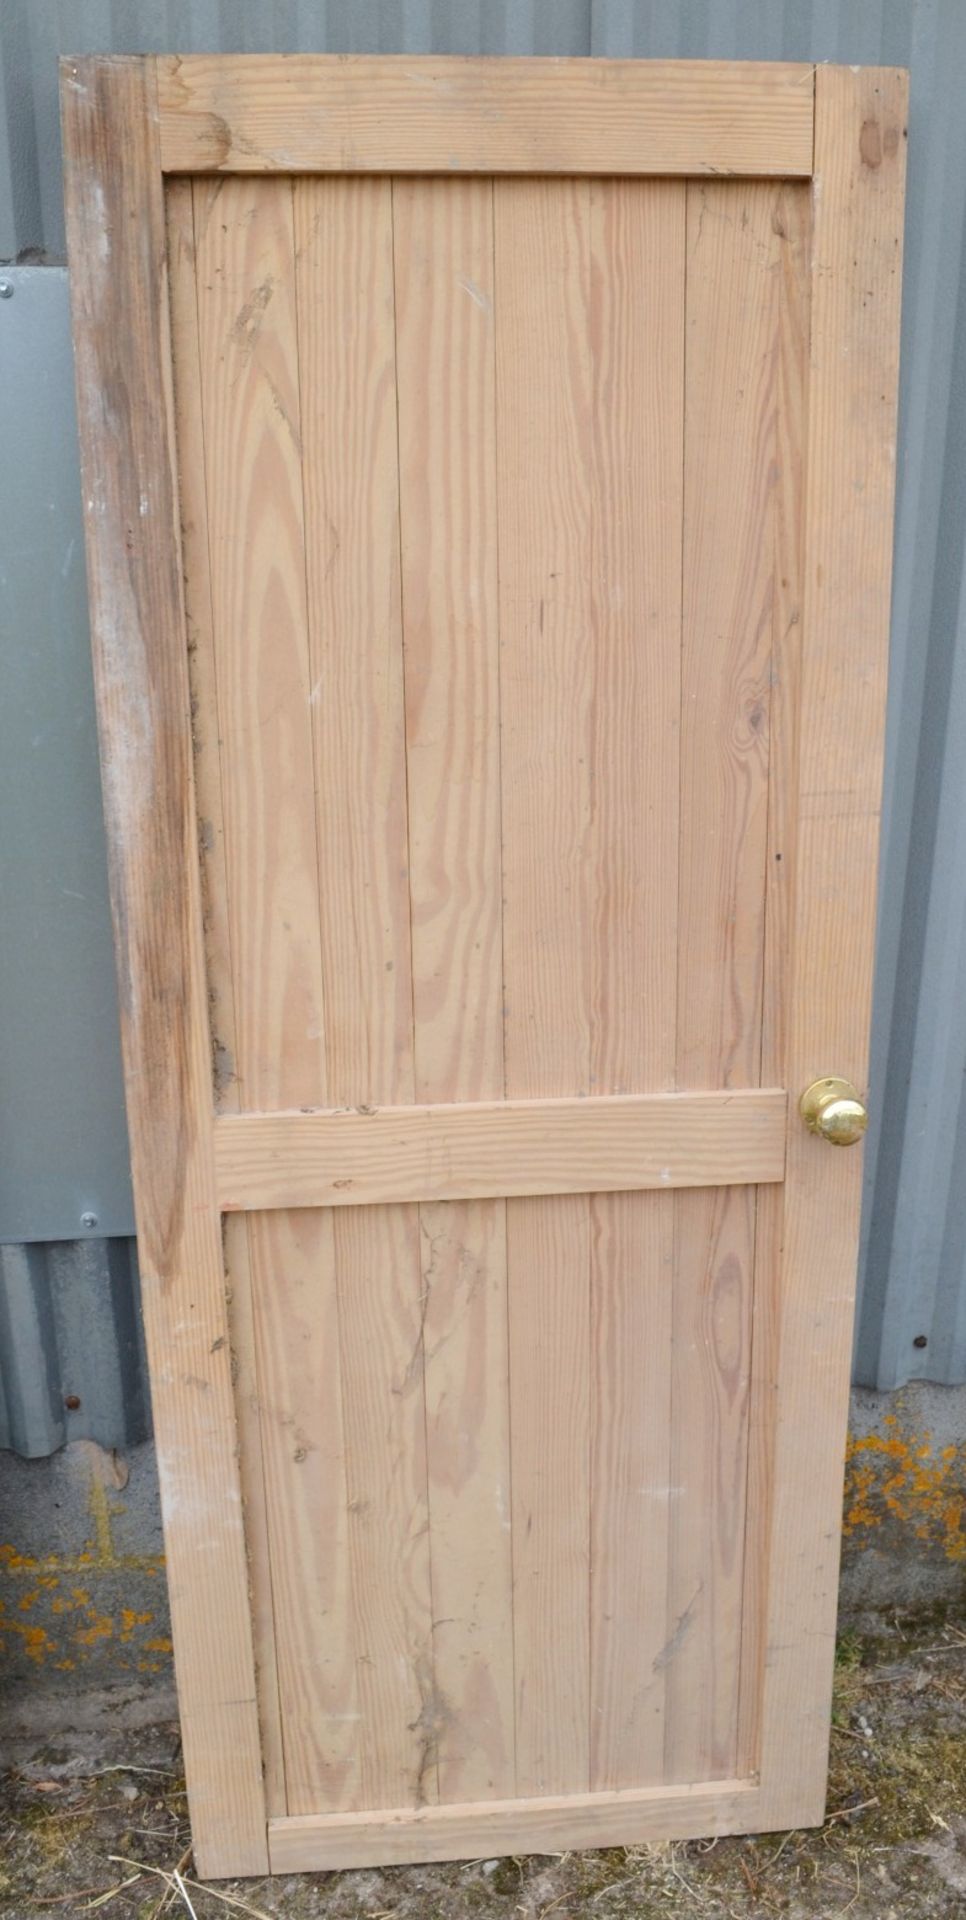 Set Of 4 x Reclaimed Wooden Doors - Taken From A Grade II Listed Property - Image 6 of 8